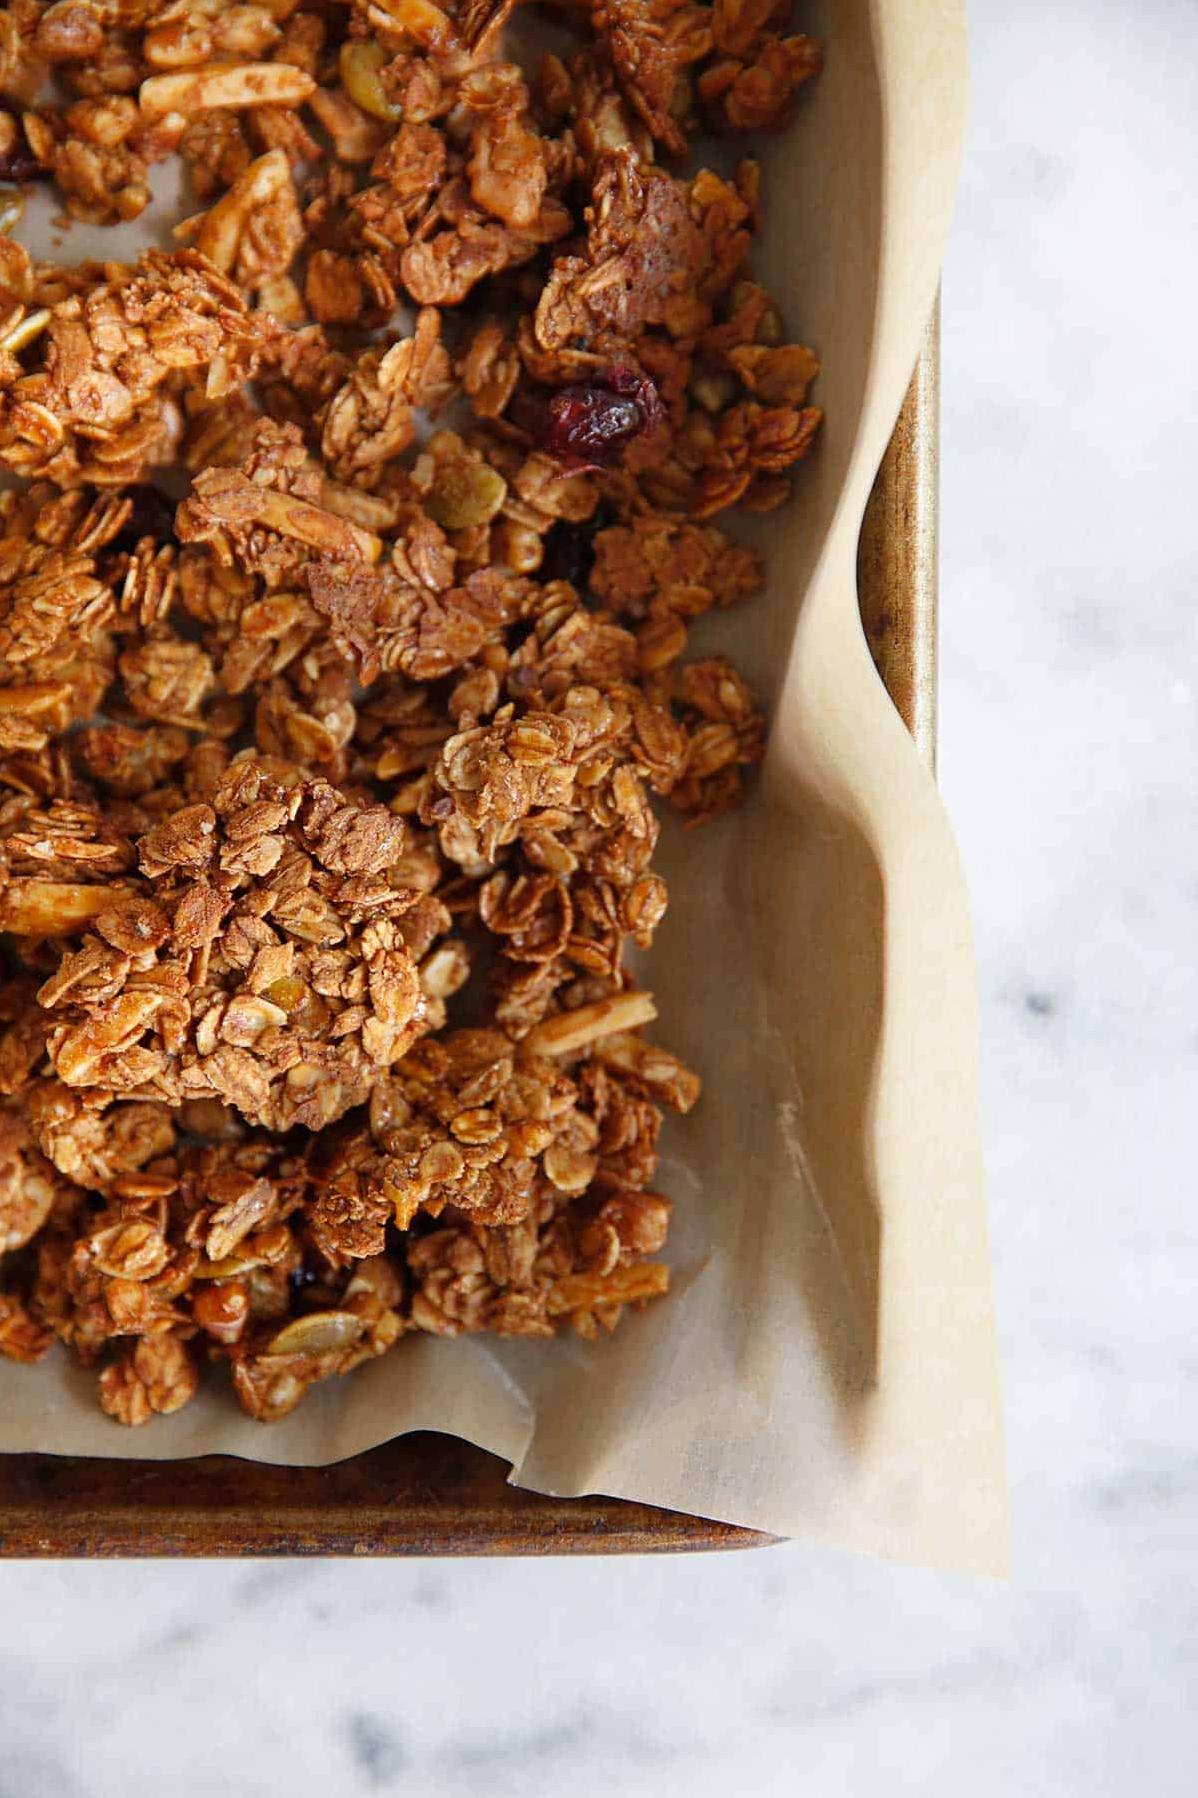  This gluten-free granola is so easy to make, you'll never go back to store-bought again!